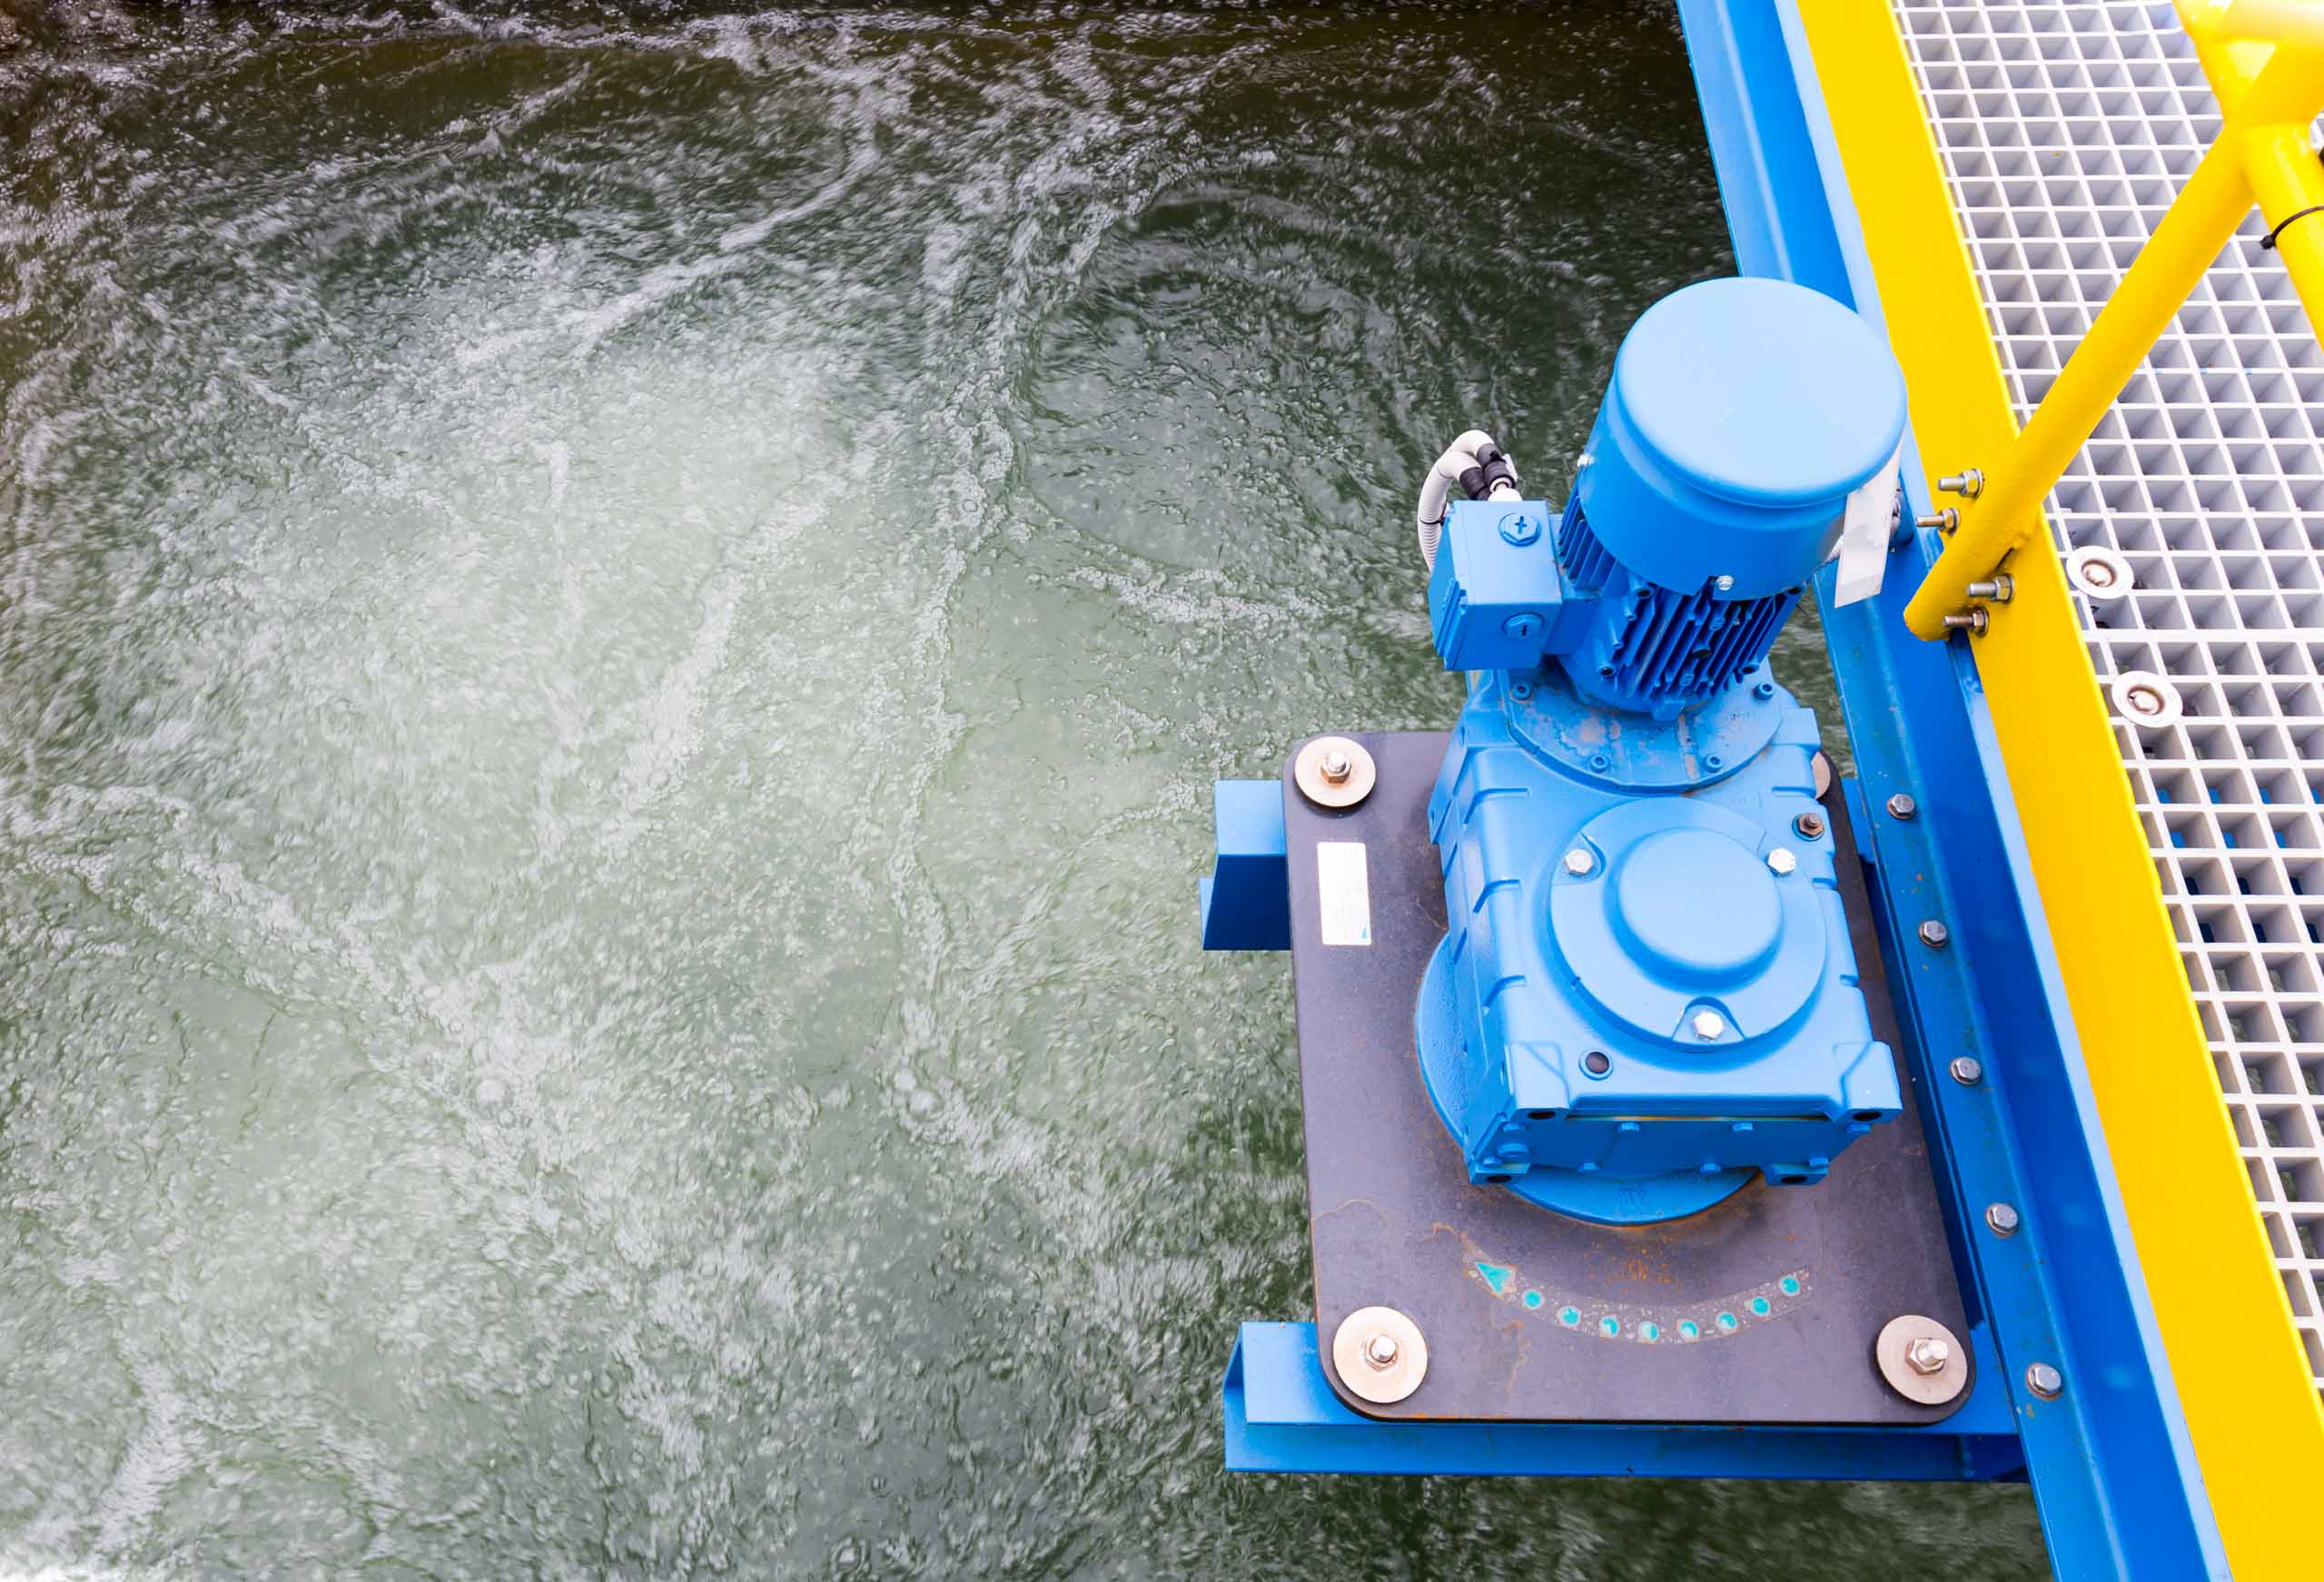 The high powered nature of the Waste-Water and Pumping industries calls for specialized controls that protect expensive and critical equipment as much as they improve the efficiency and power consumption of the systems. We’ve engineered solutions that reduce power consumption, maintain utility requirements and extend the life of equipment.